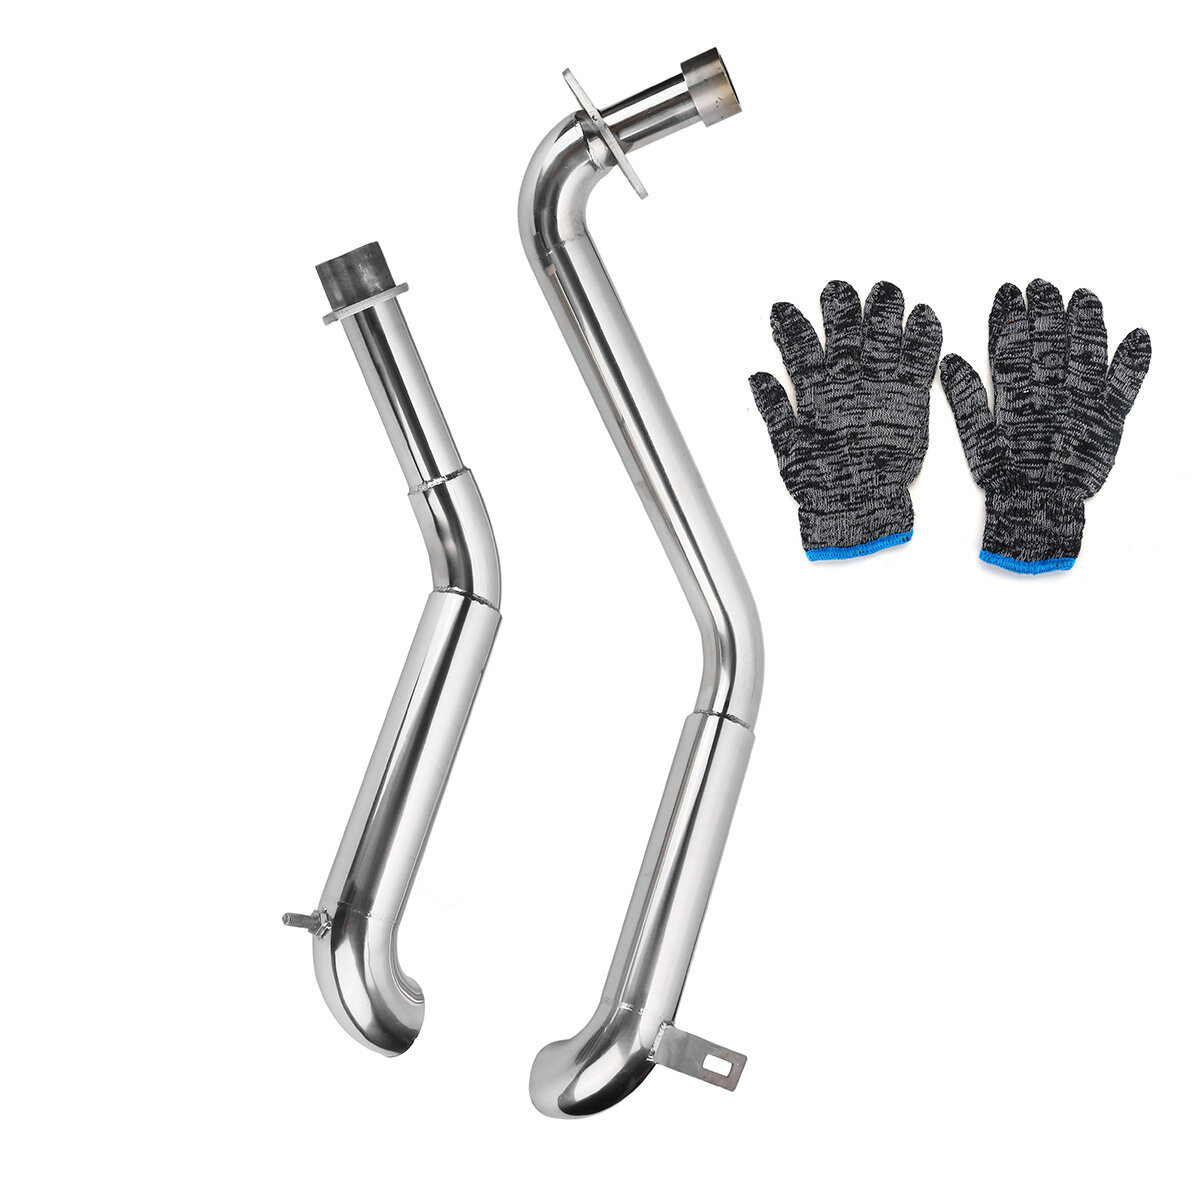 Image of 2PCS Slash Cut Pipes Full Exhaust System + Silencer For Honda STEED VLX400 VLX600